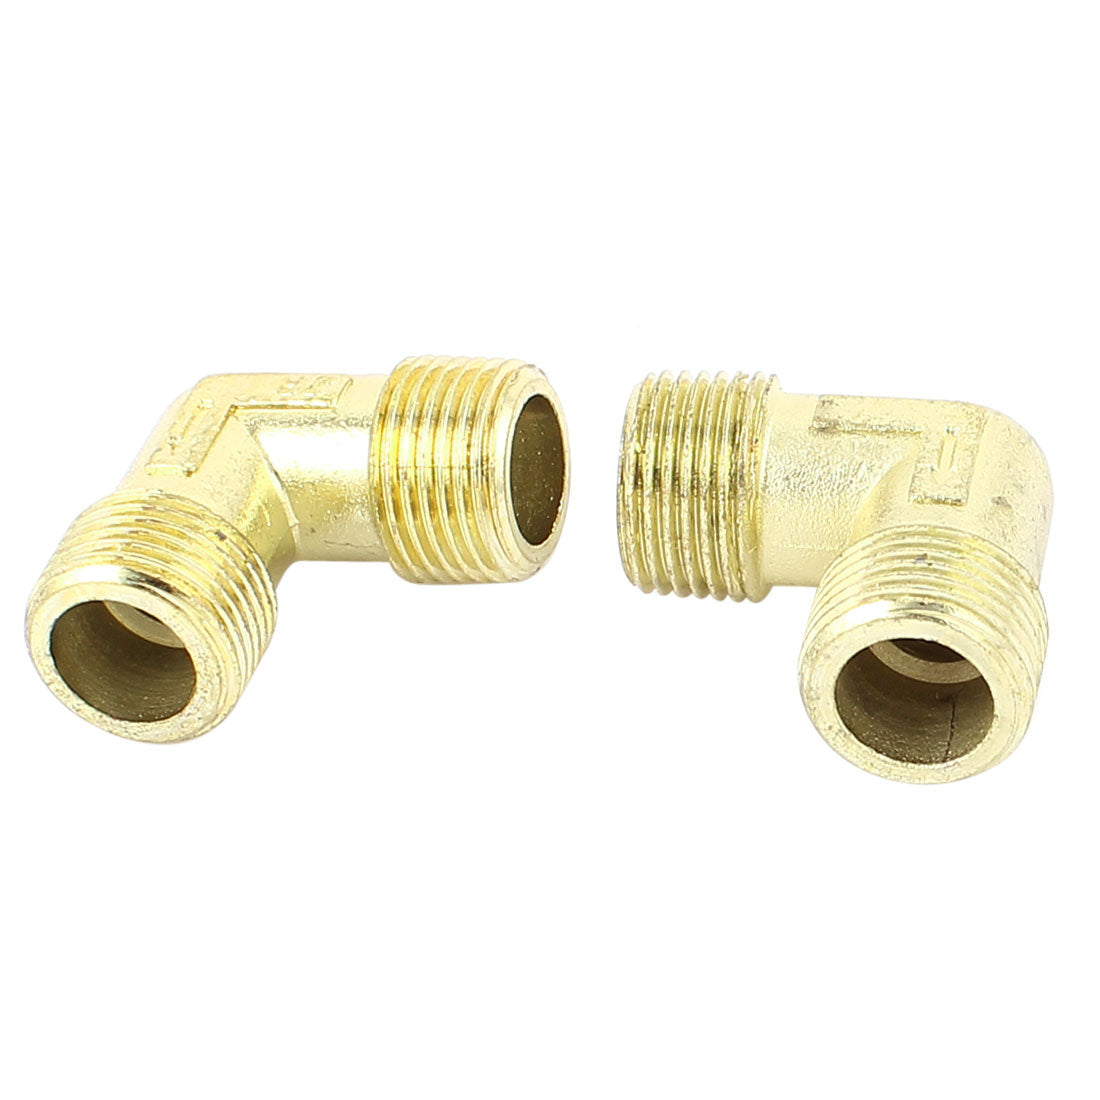 uxcell Uxcell 2 Pcs Metal Pipe 90 Deg 3/8 BSP Male to Male Water Fuel Elbow Fitting